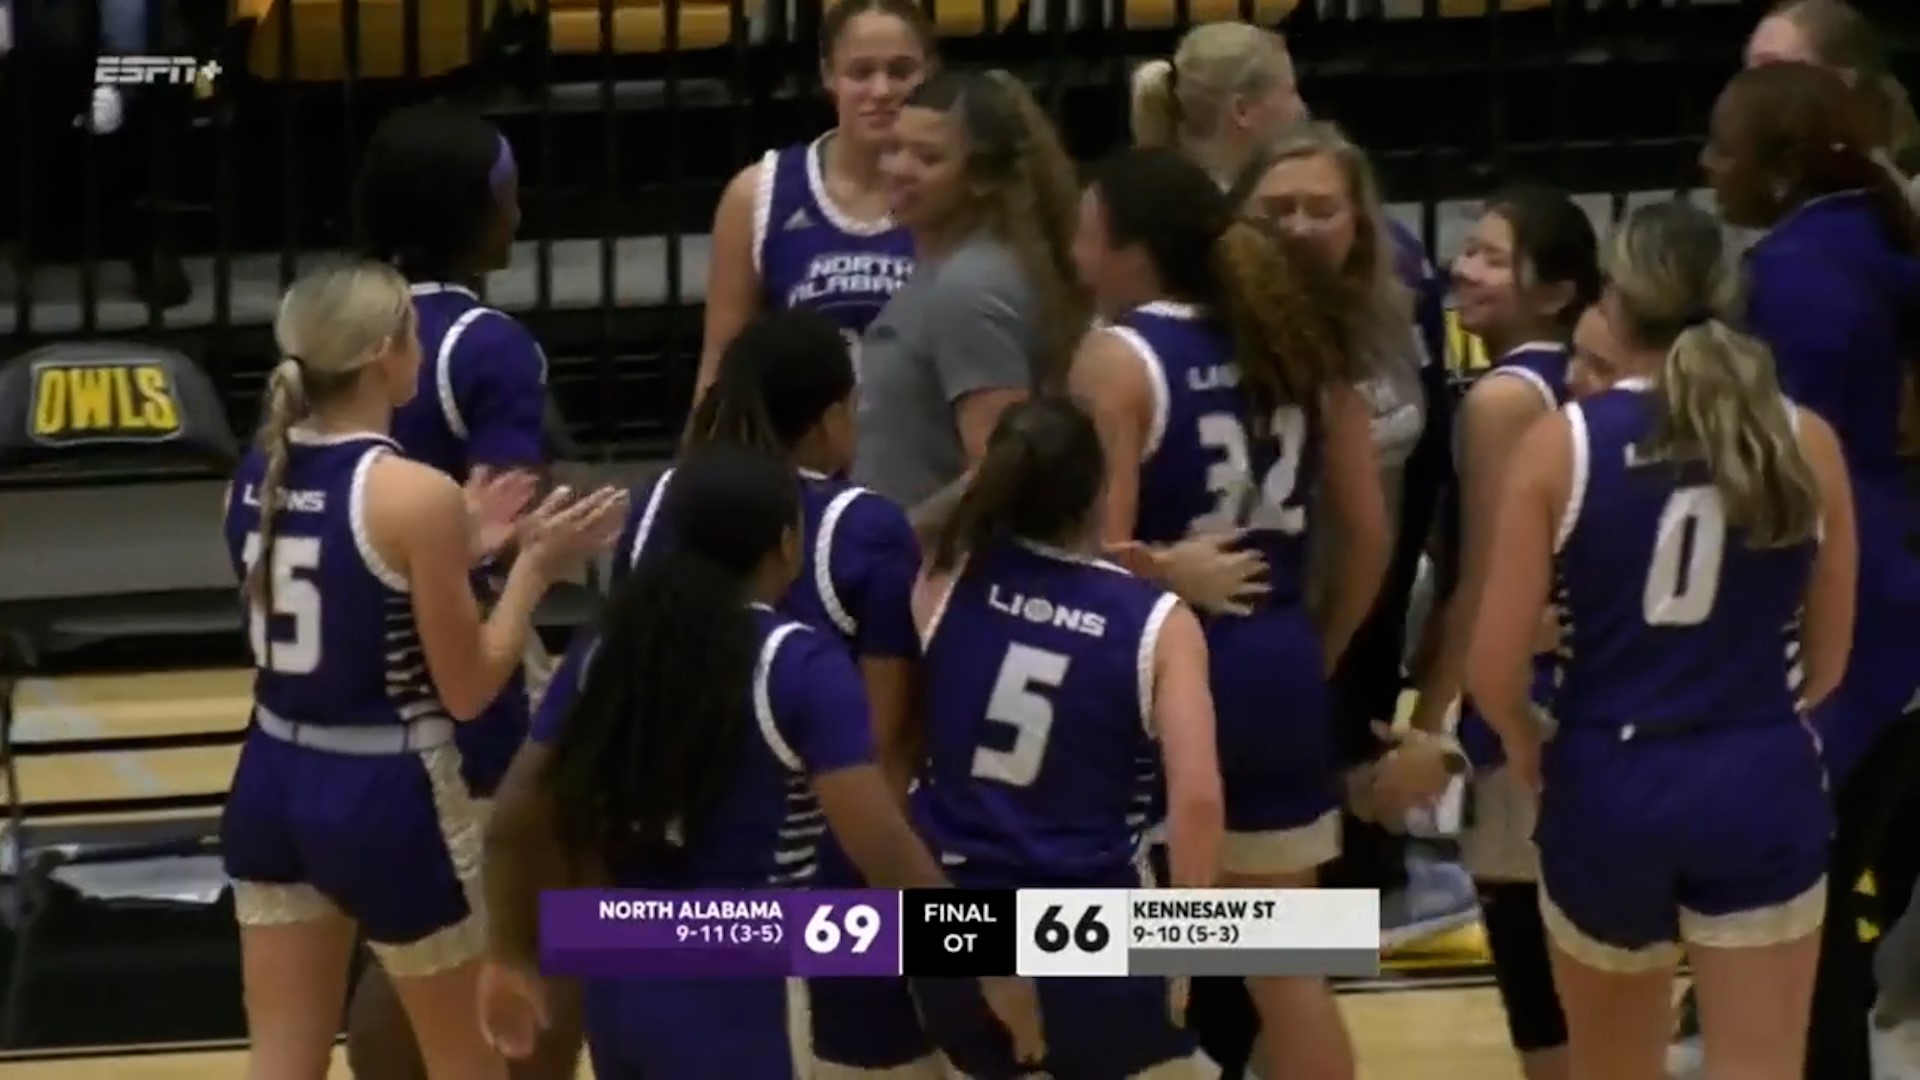 Down by as many as 16 points in the first half, the UNA women’s basketball team battled back to take a 69-66 over Kennesaw St.